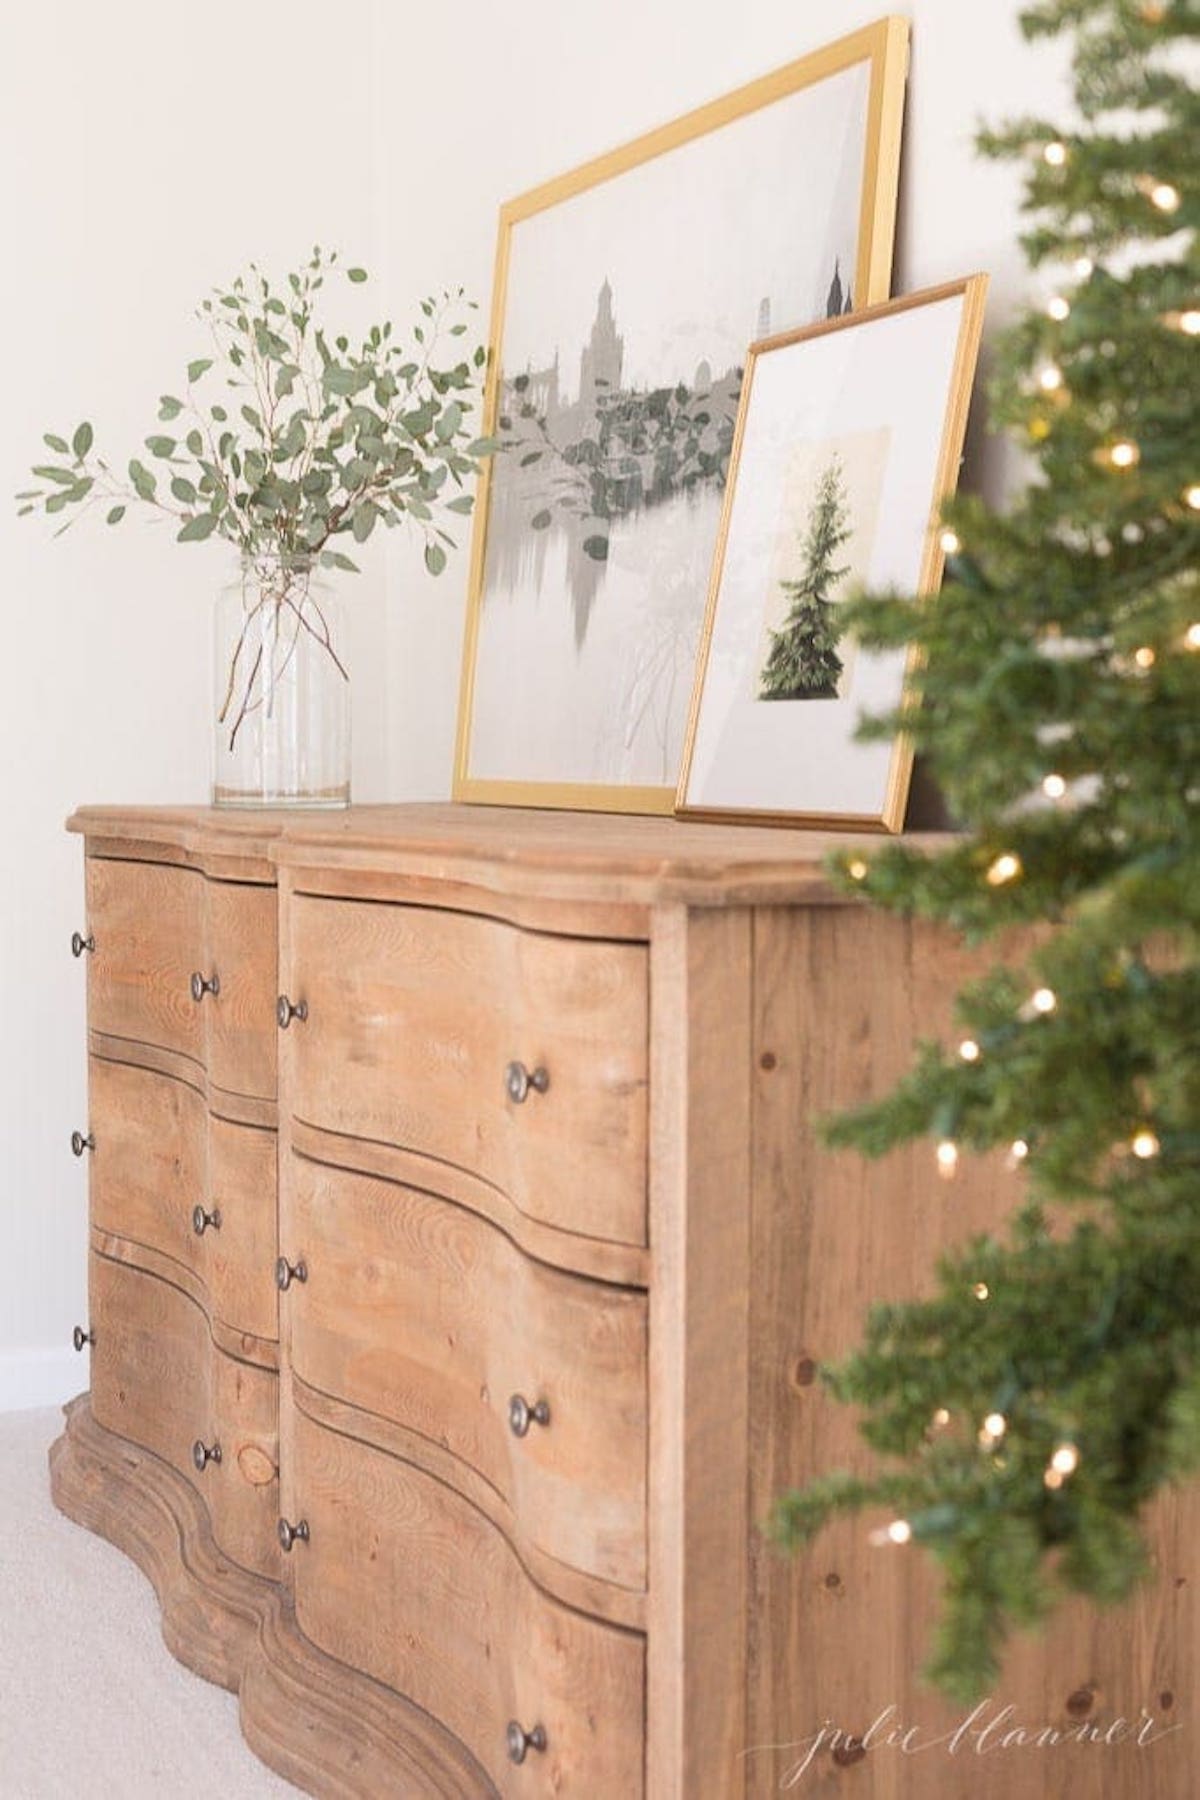 A wooden dresser adorned with a festive christmas tree, with twinkling Christmas lights illuminating the bedroom.